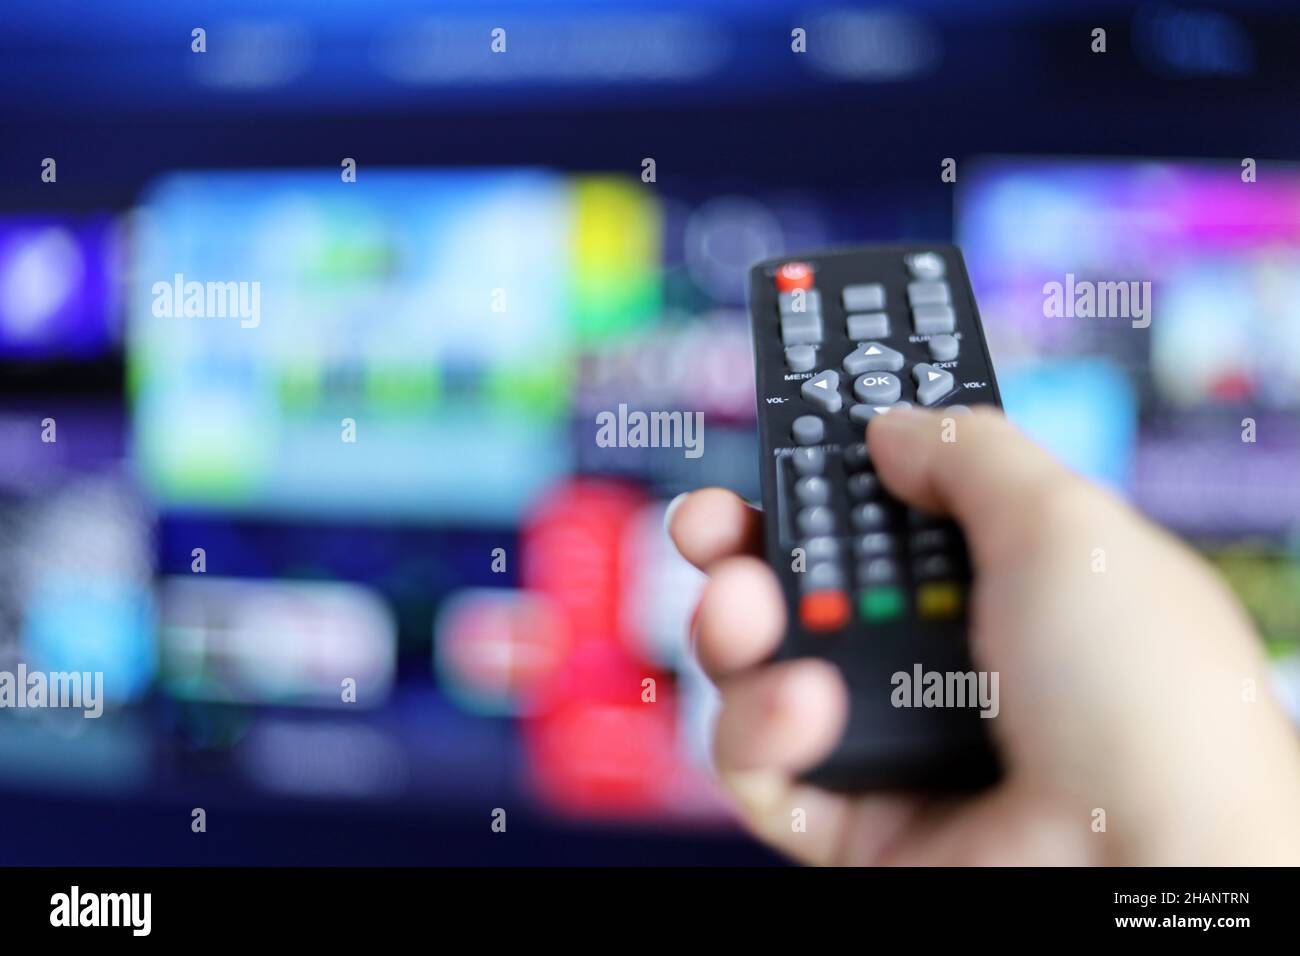 Remote controller in female hand on smart TV screen background. Woman choosing streaming services, watching movies Stock Photo